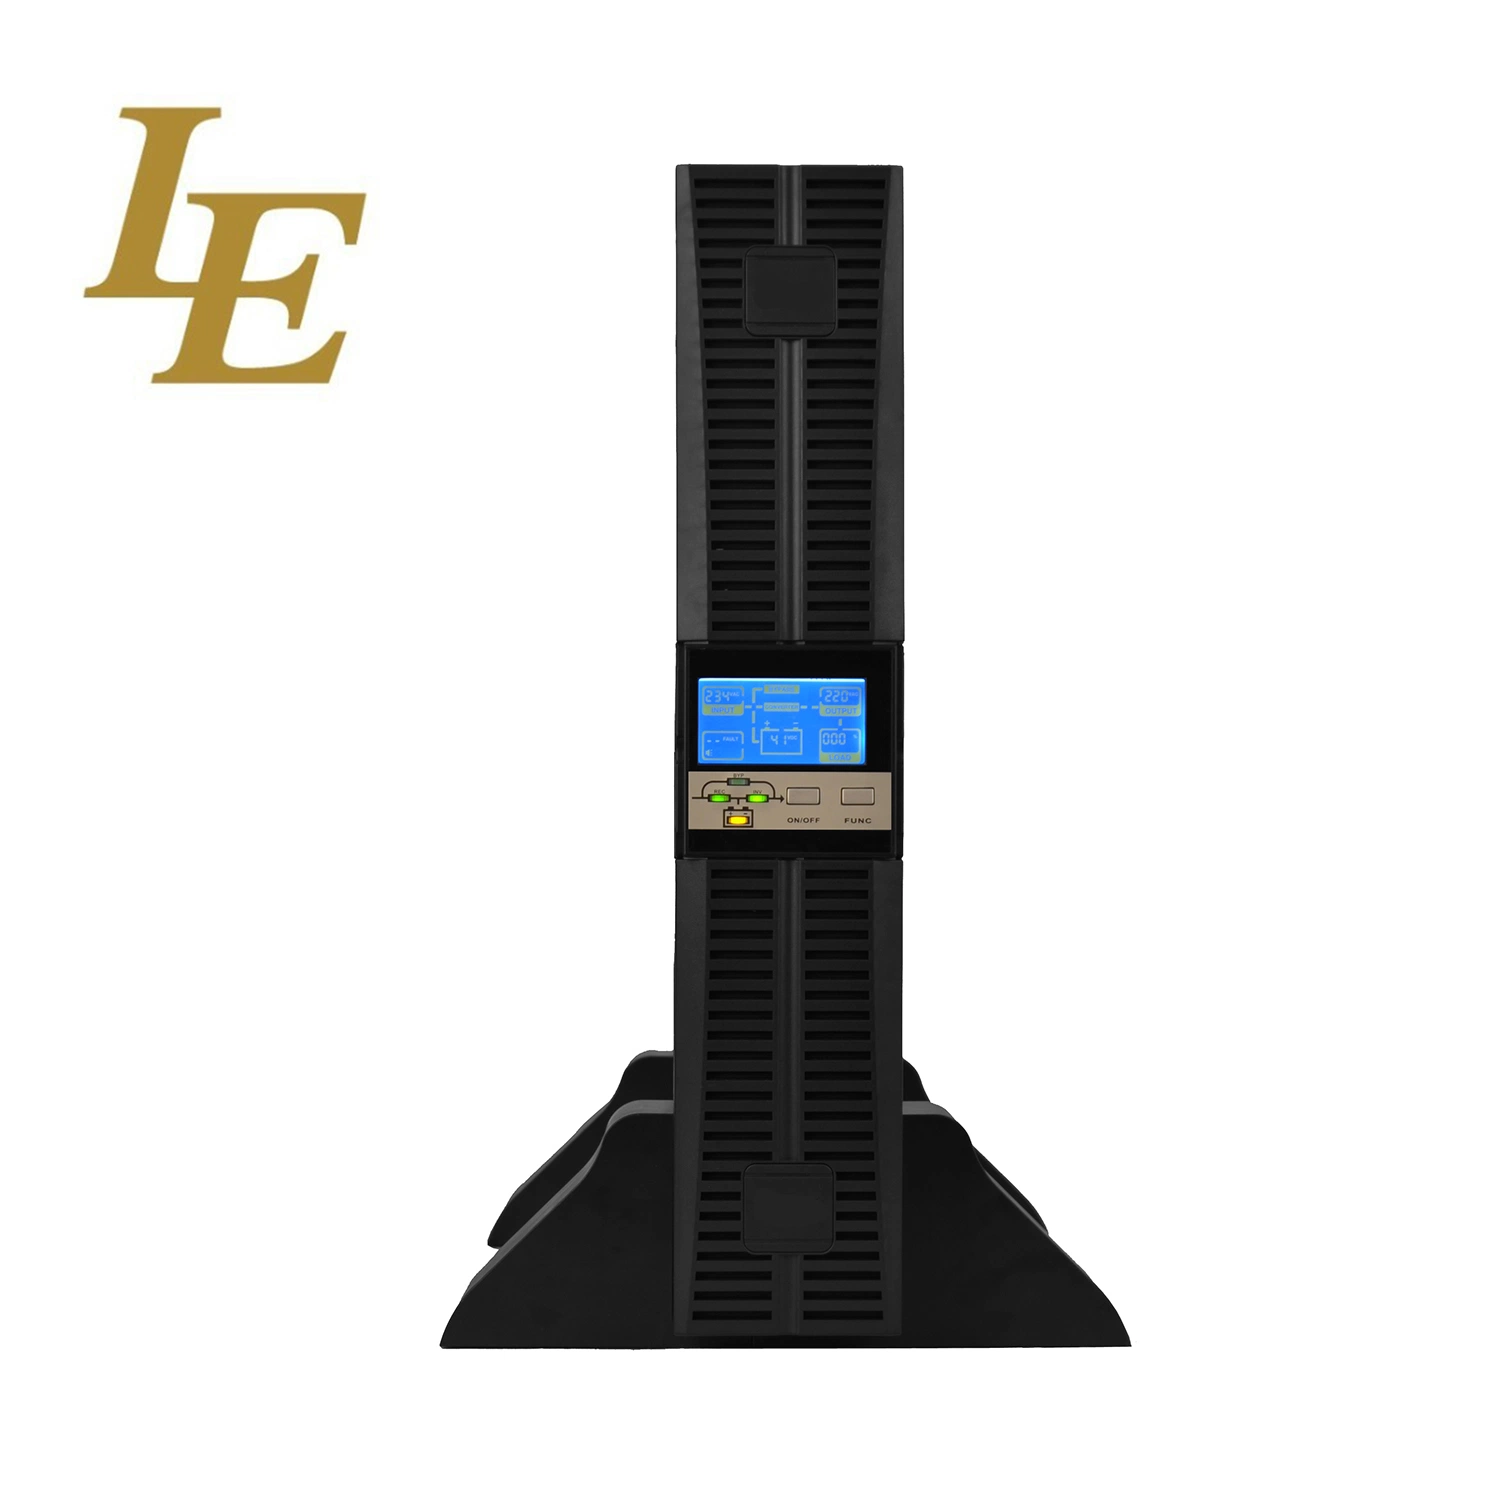 Le Single Three Phase 1kw-20kw High Frequency Online UPS Uninterrupted Power Supply